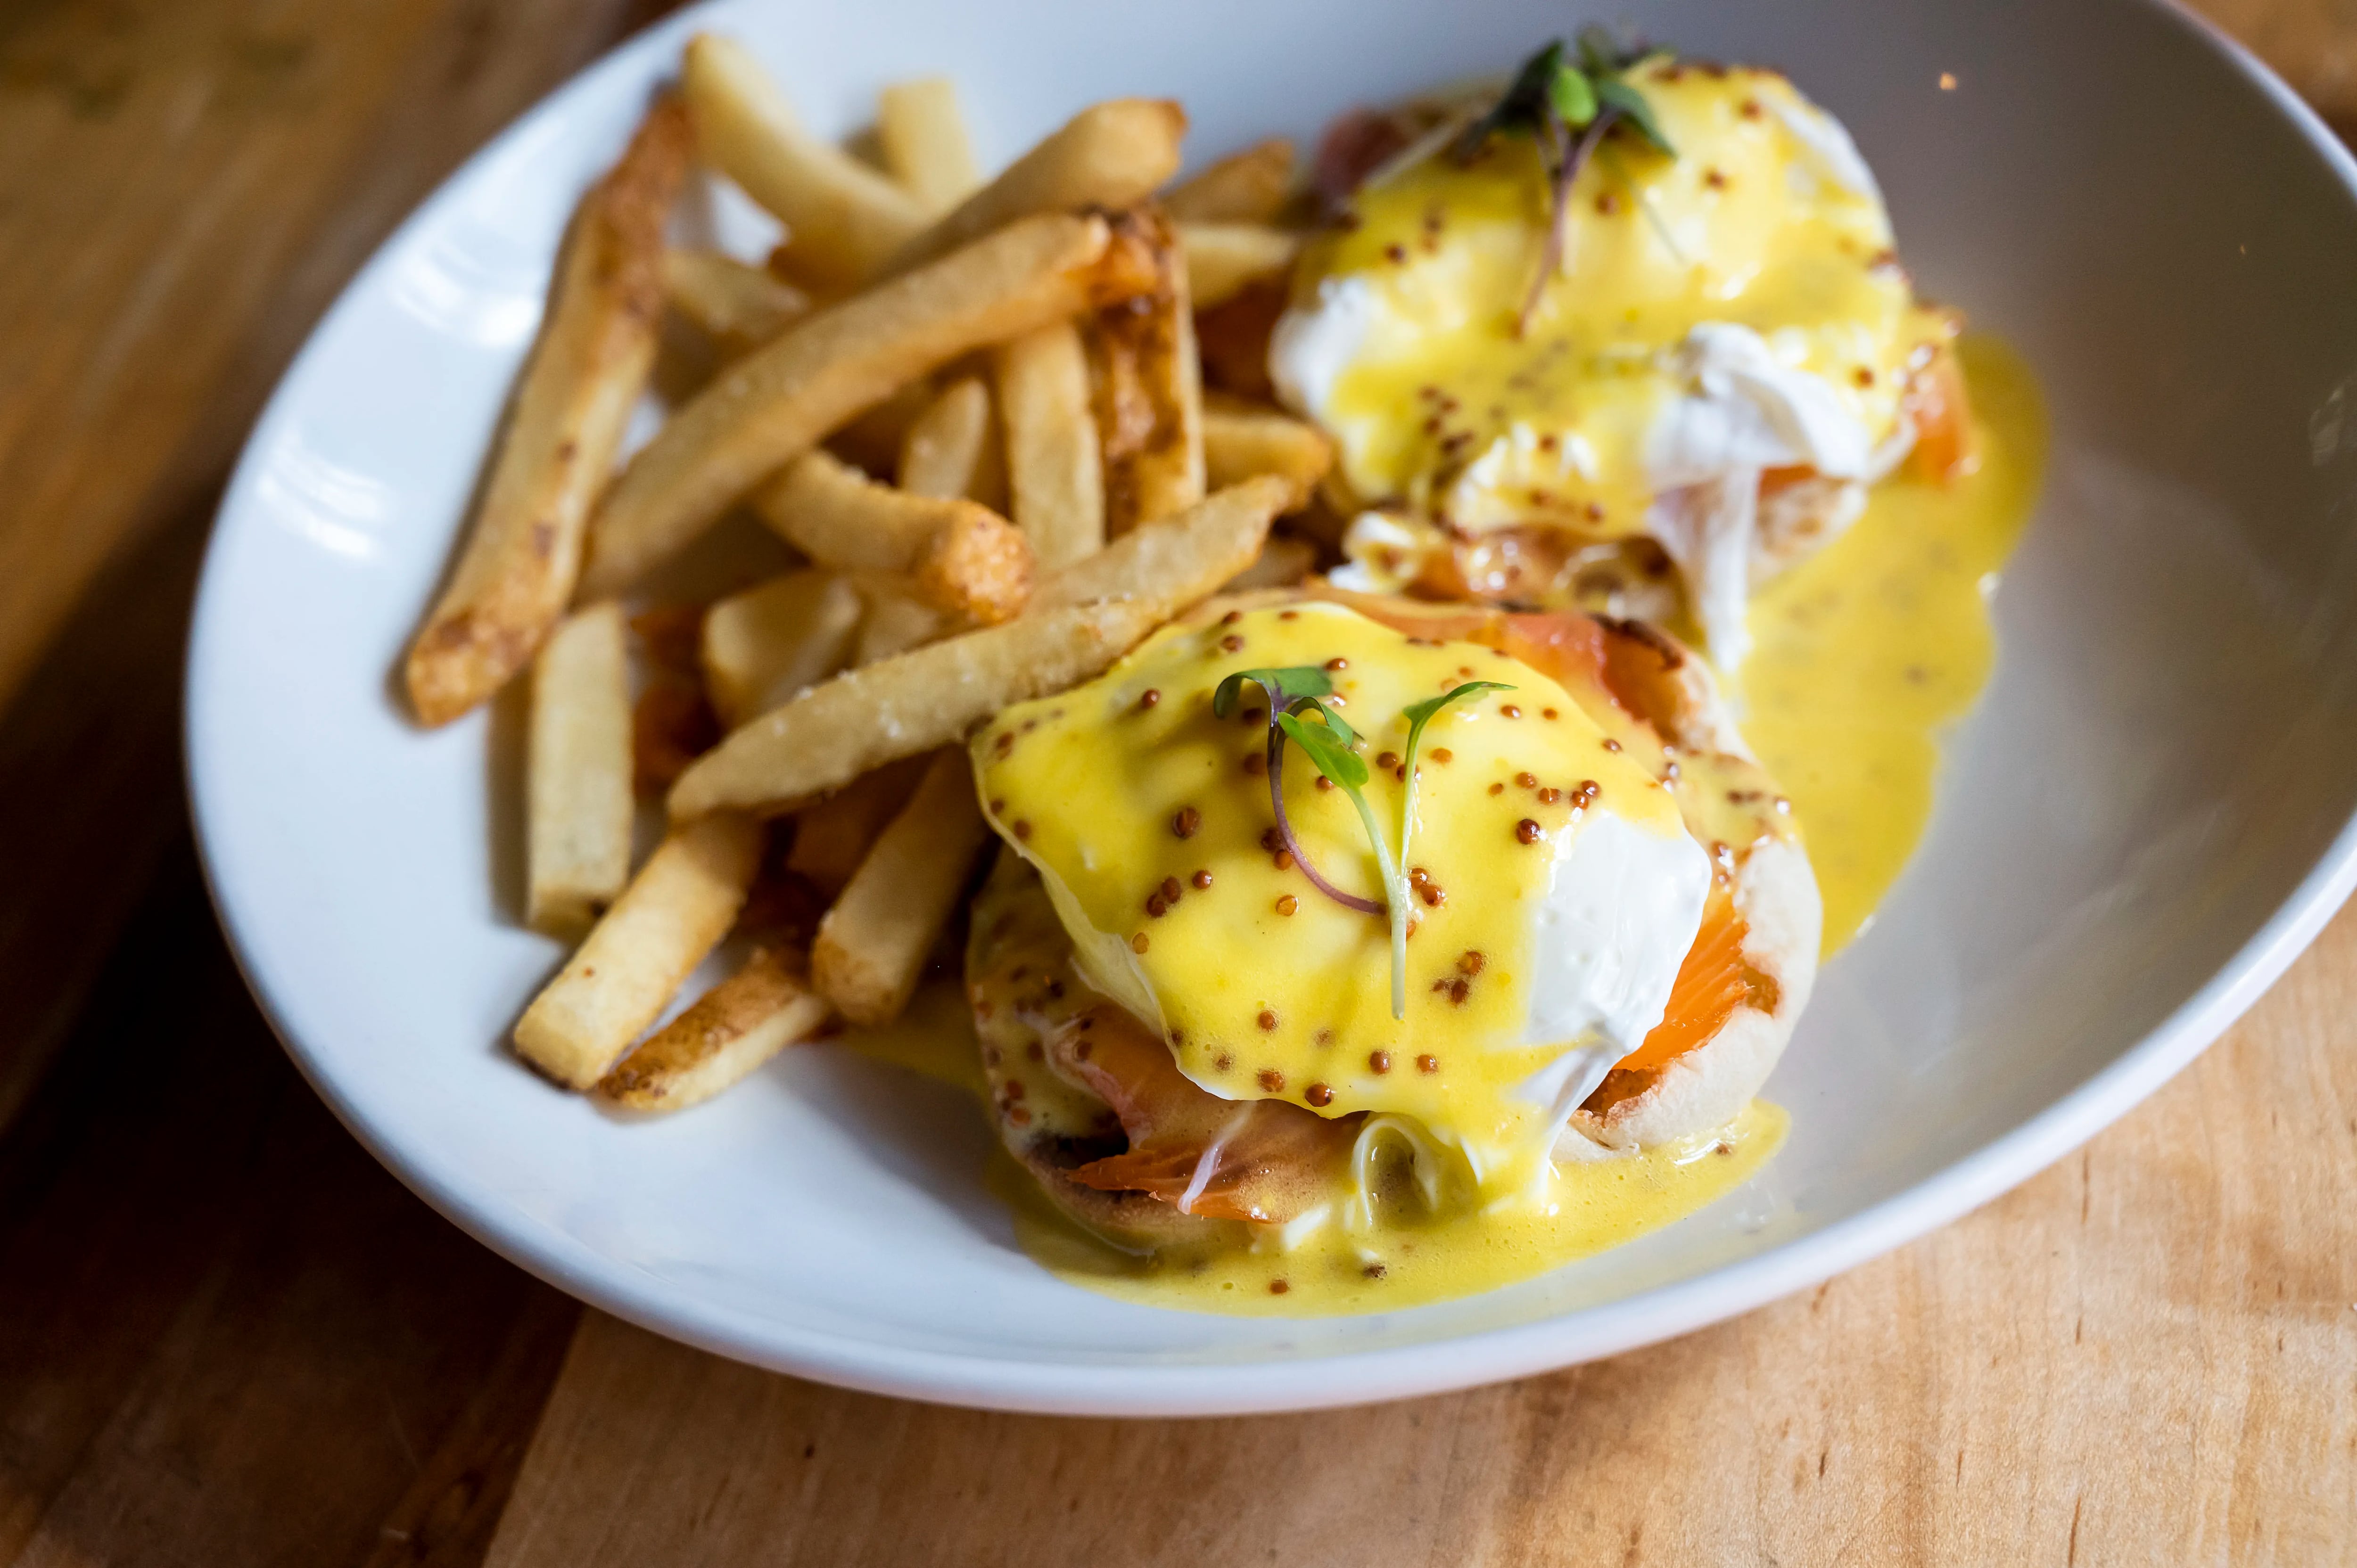 Treat Mom to the the smoked salmon Benedict at The Twisted Tail.